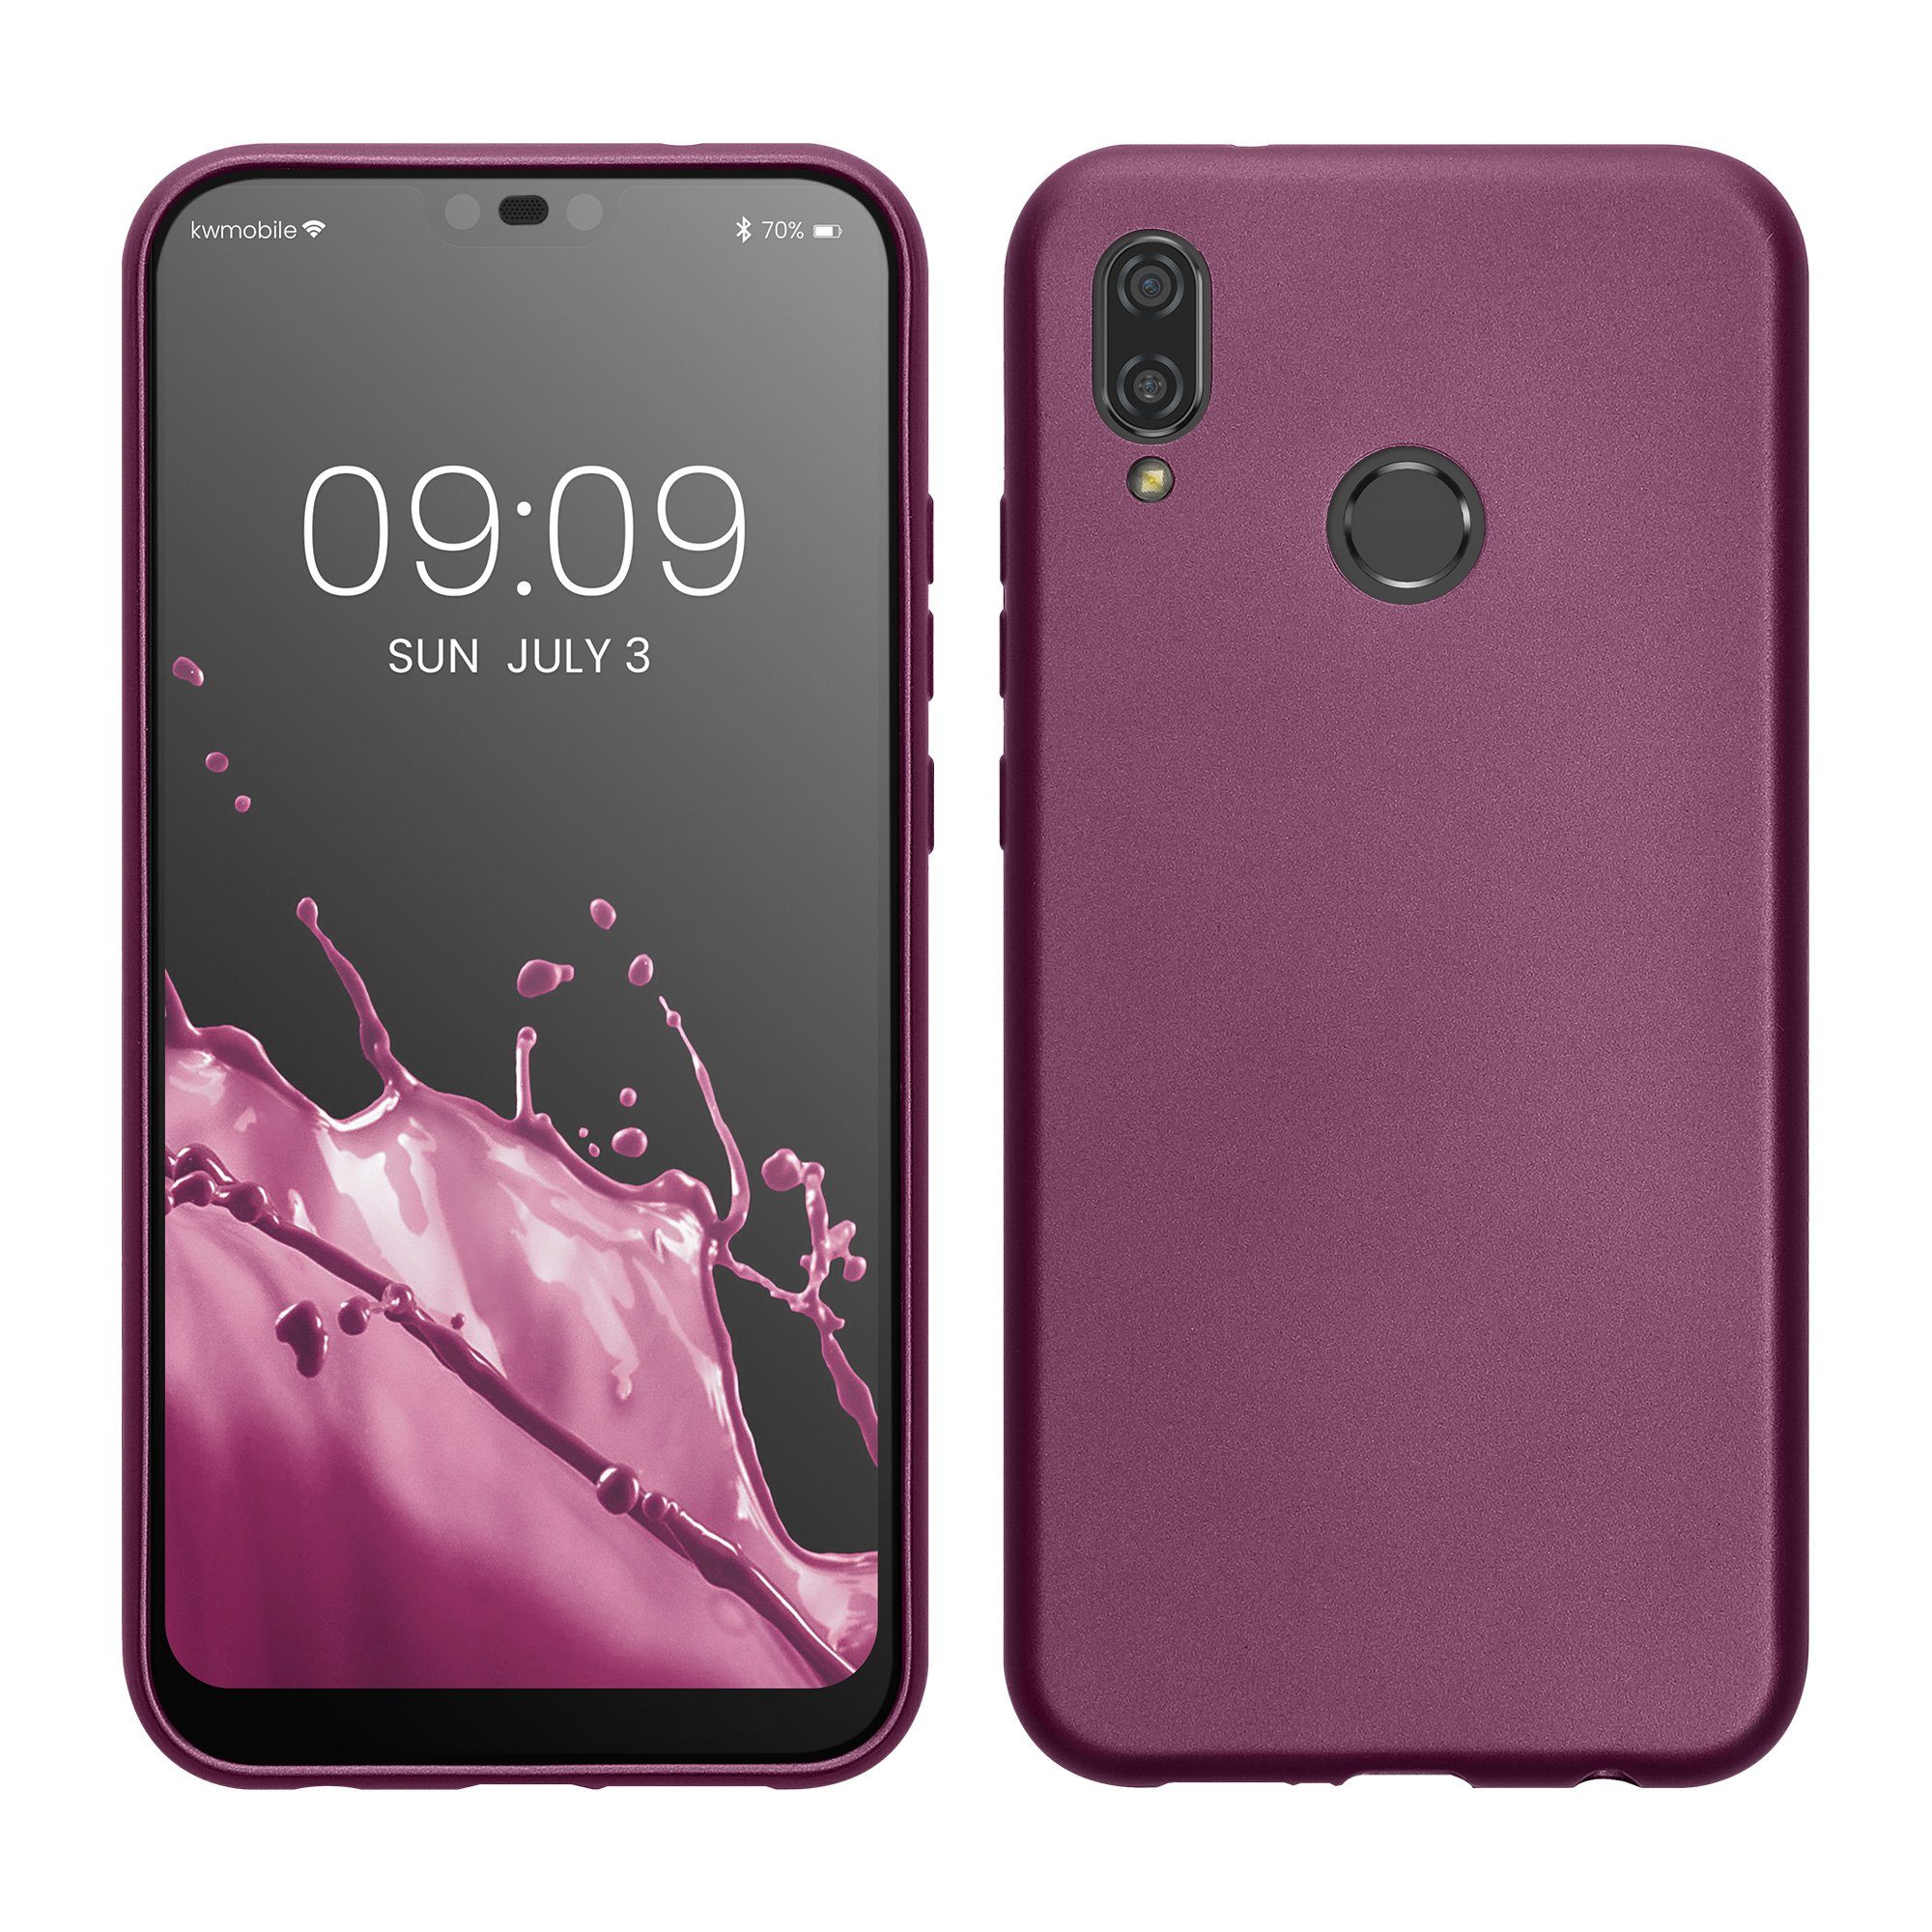 kwmobile Case Compatible with Huawei Nova 5T Case - Soft Slim Protective  TPU Silicone Cover - Light Lavender